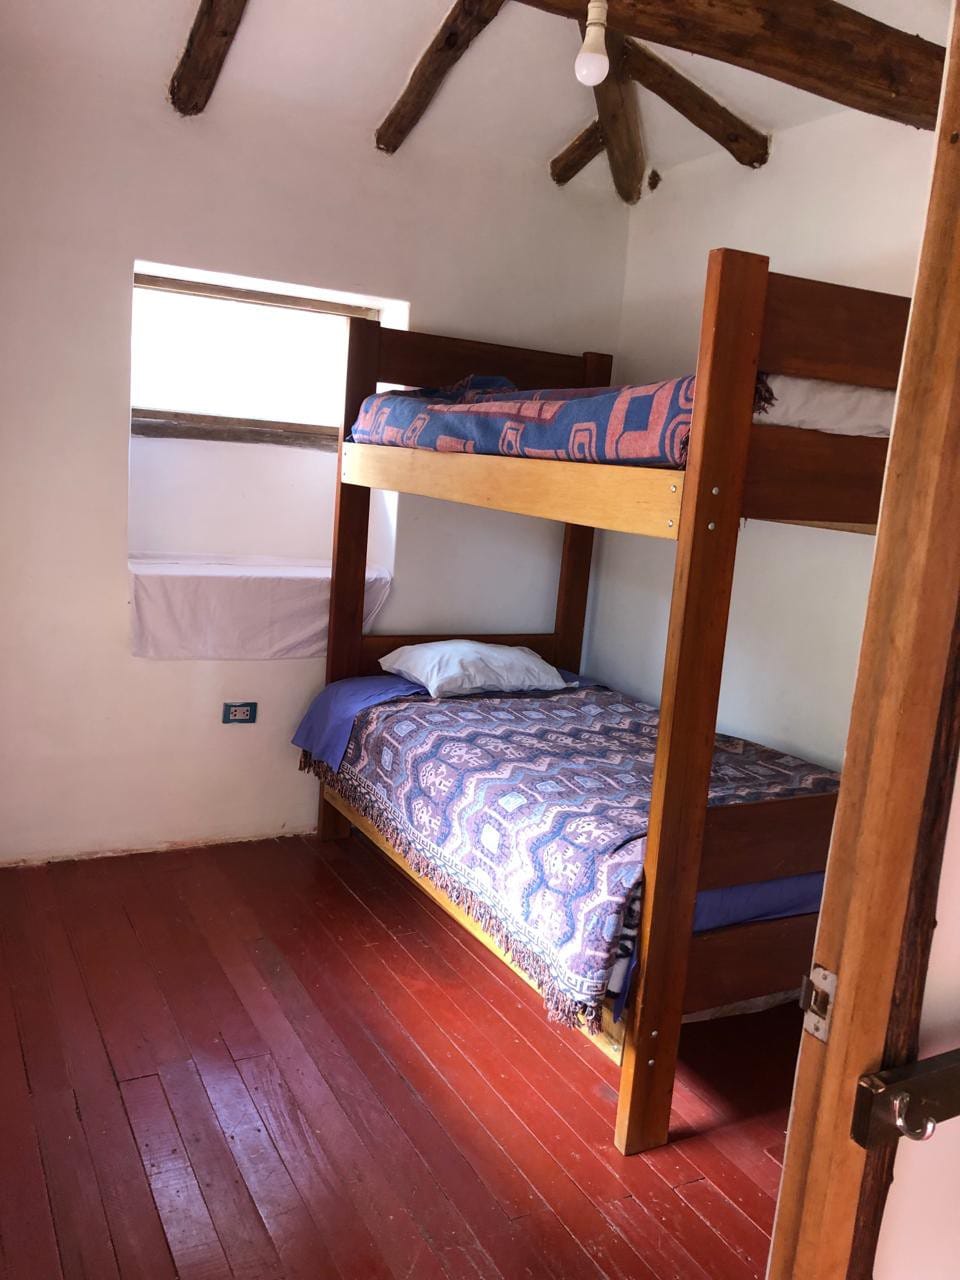 Rooms with Wifi + Hot Shower + Complete Furnitures